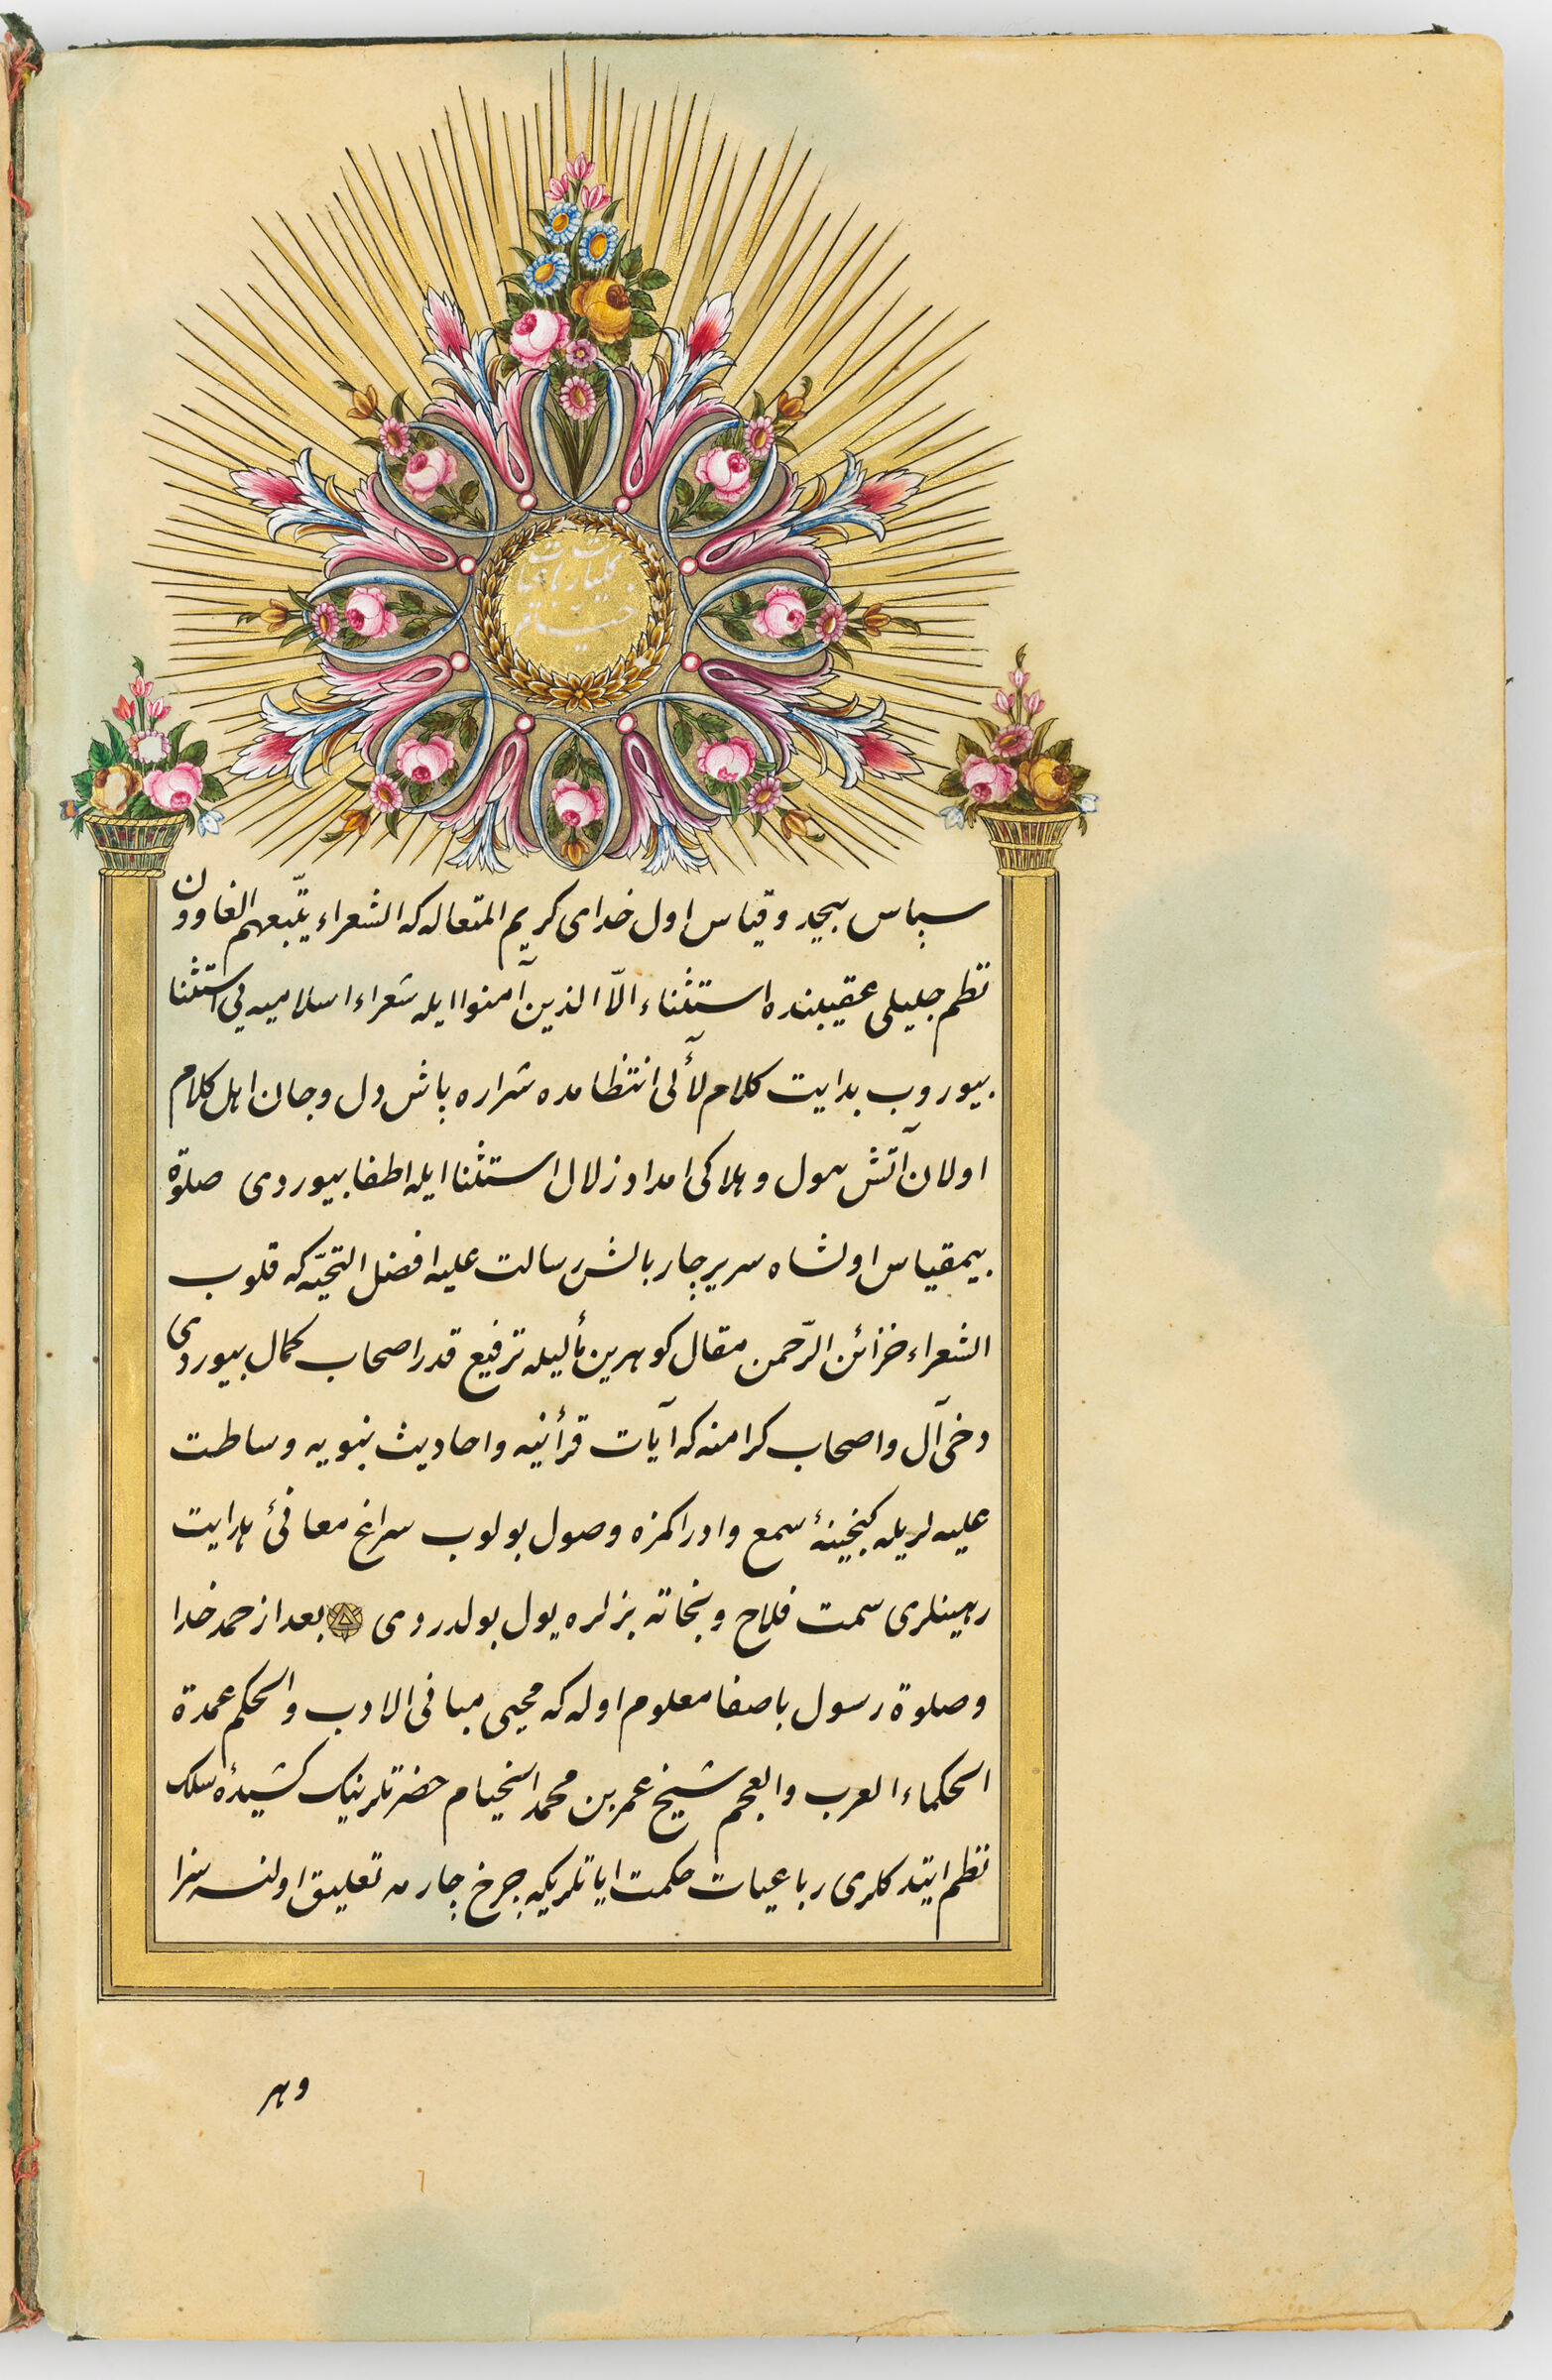 Frontispiece With A Decorated Sarlawh (Blank Recto; Text Verso Of Folio 2), From A Manuscript Of The Ruba‘yyat By ‘Umar Khayyam